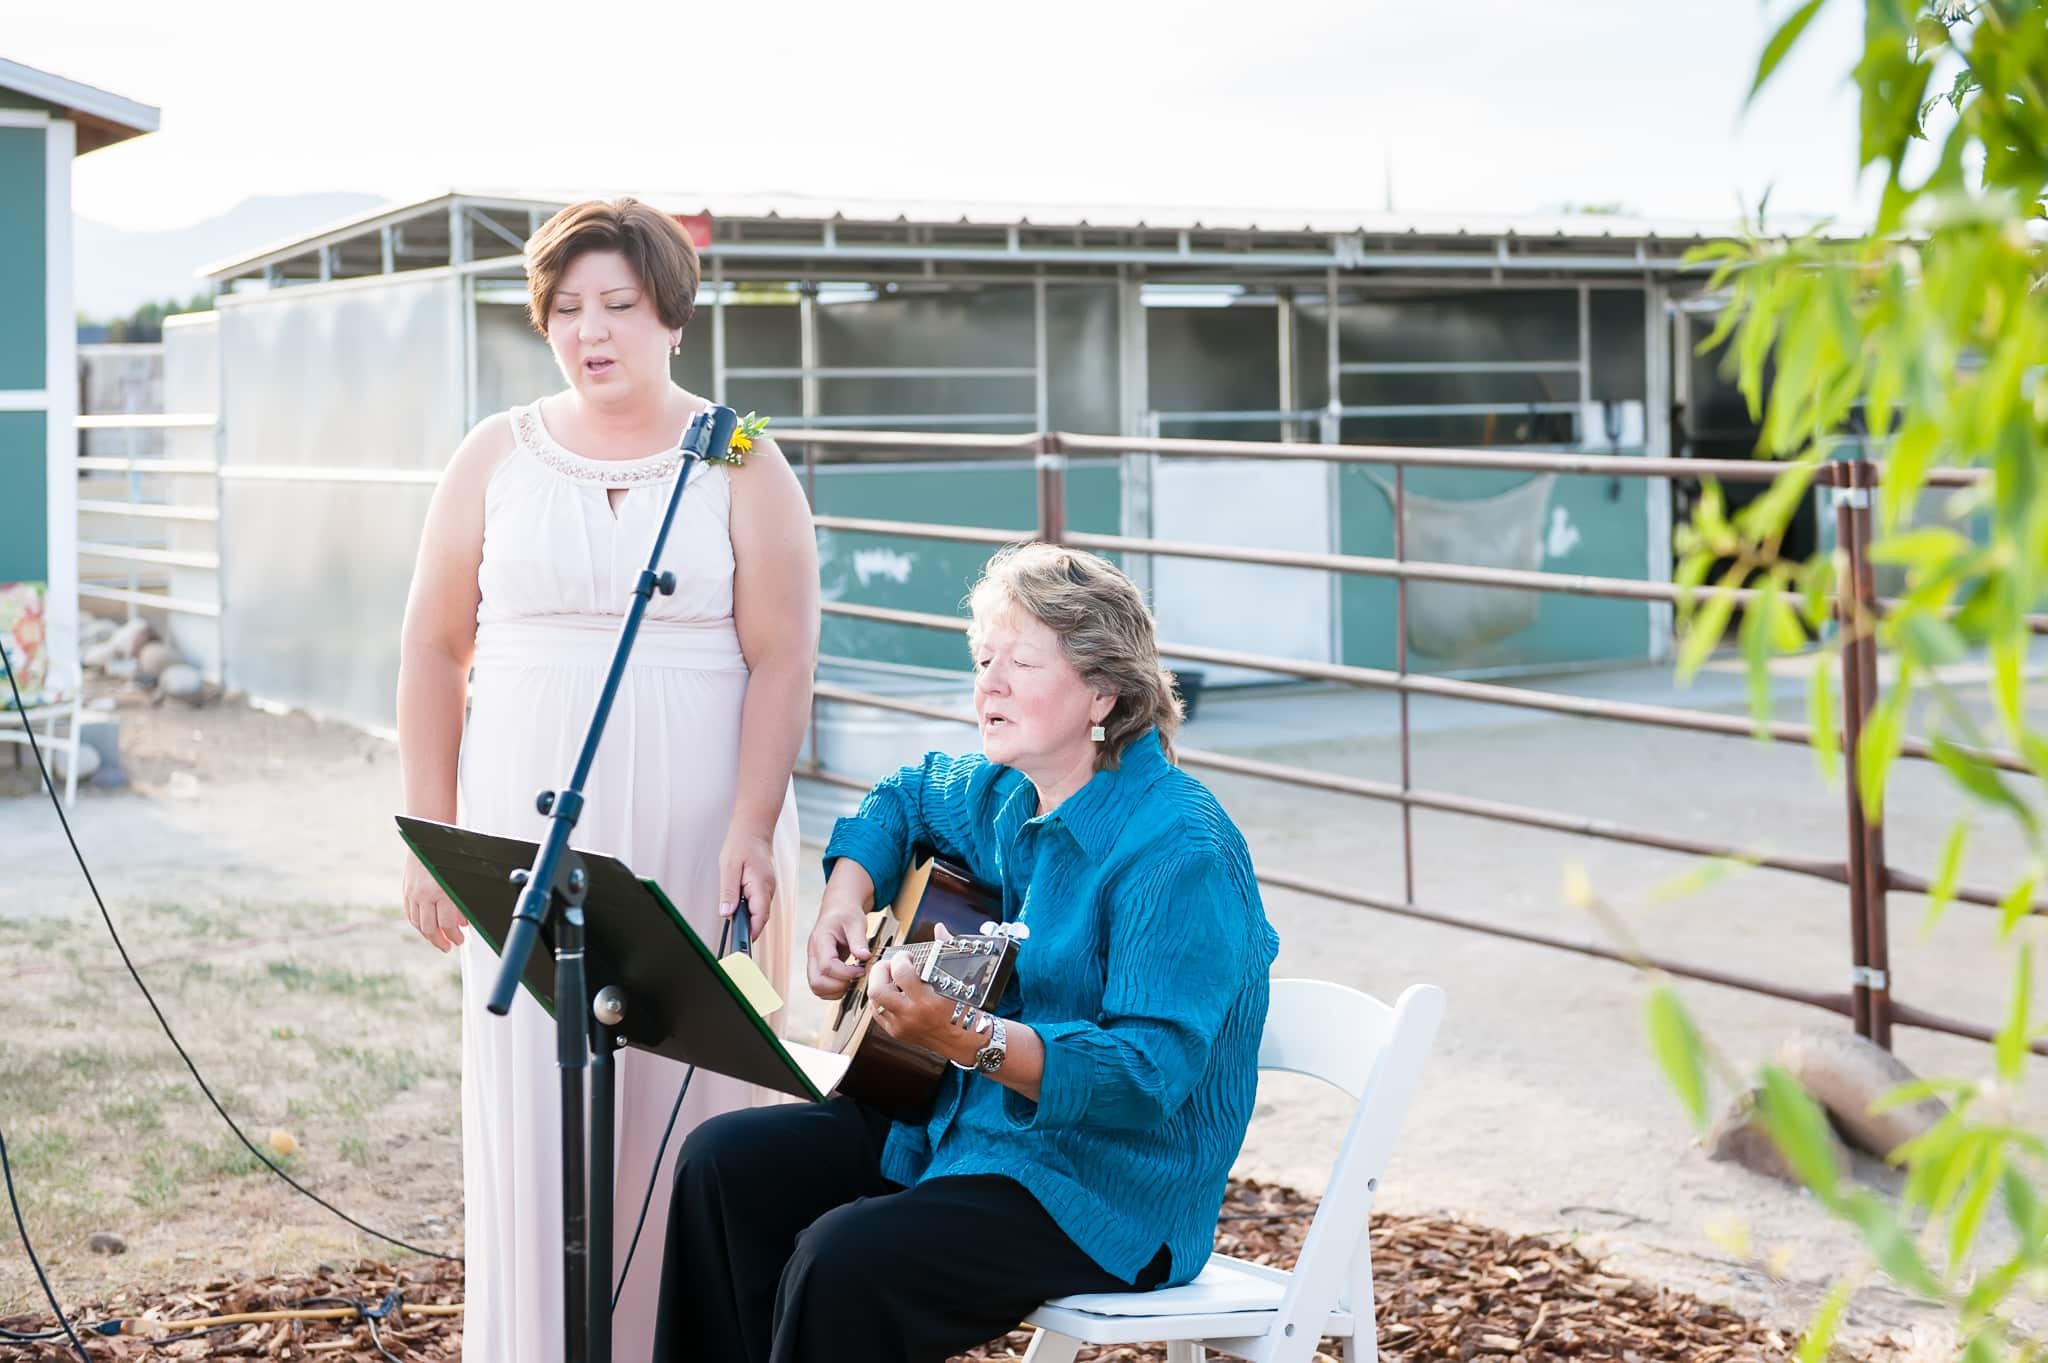 The mother-of-the-bride shares her talents by singing at her daughters wedding.